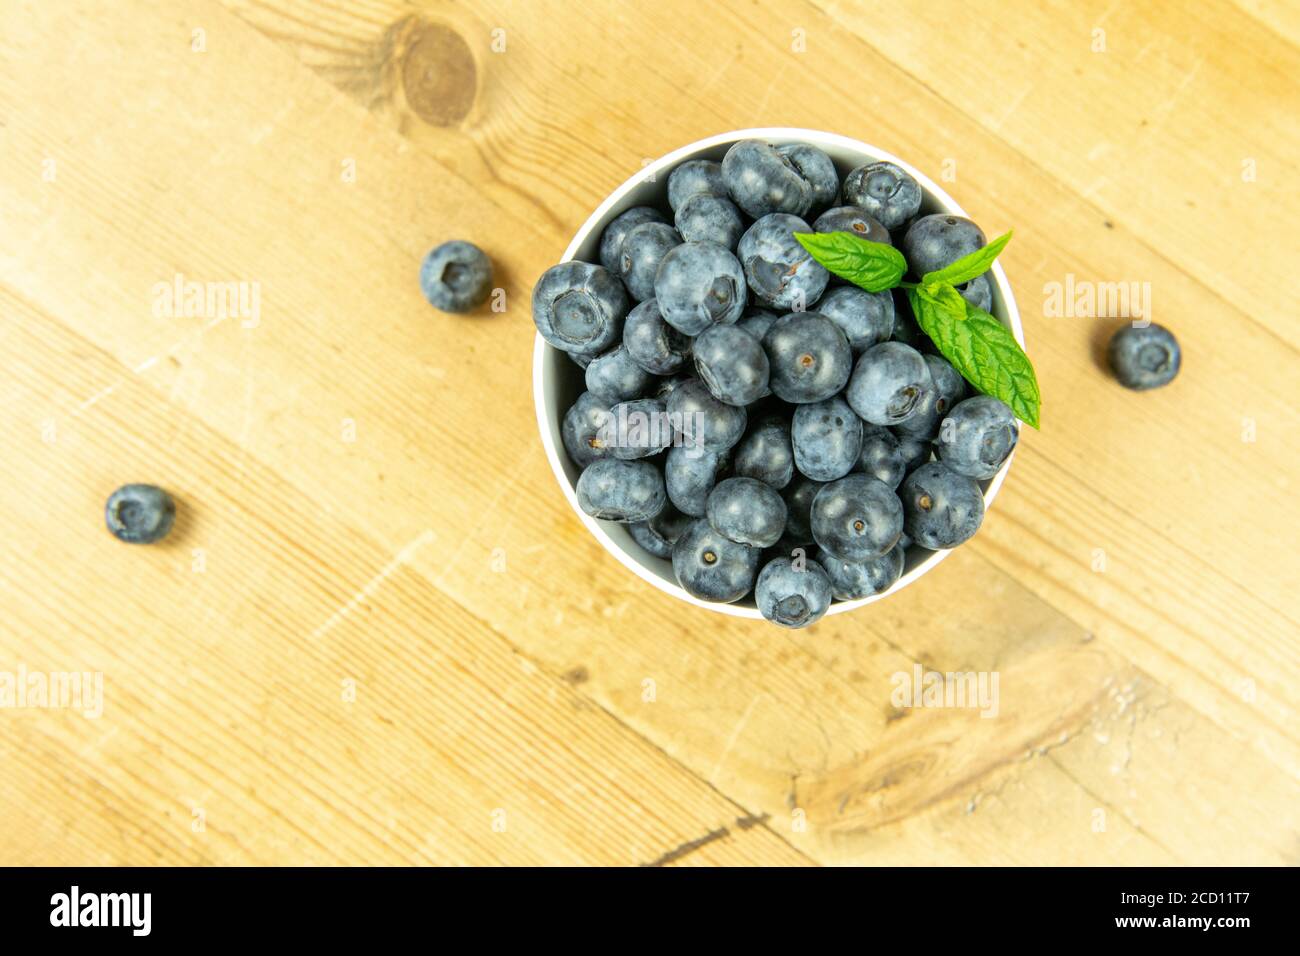 Fresh blueberries in a yellow contorting bowl Stock Photo